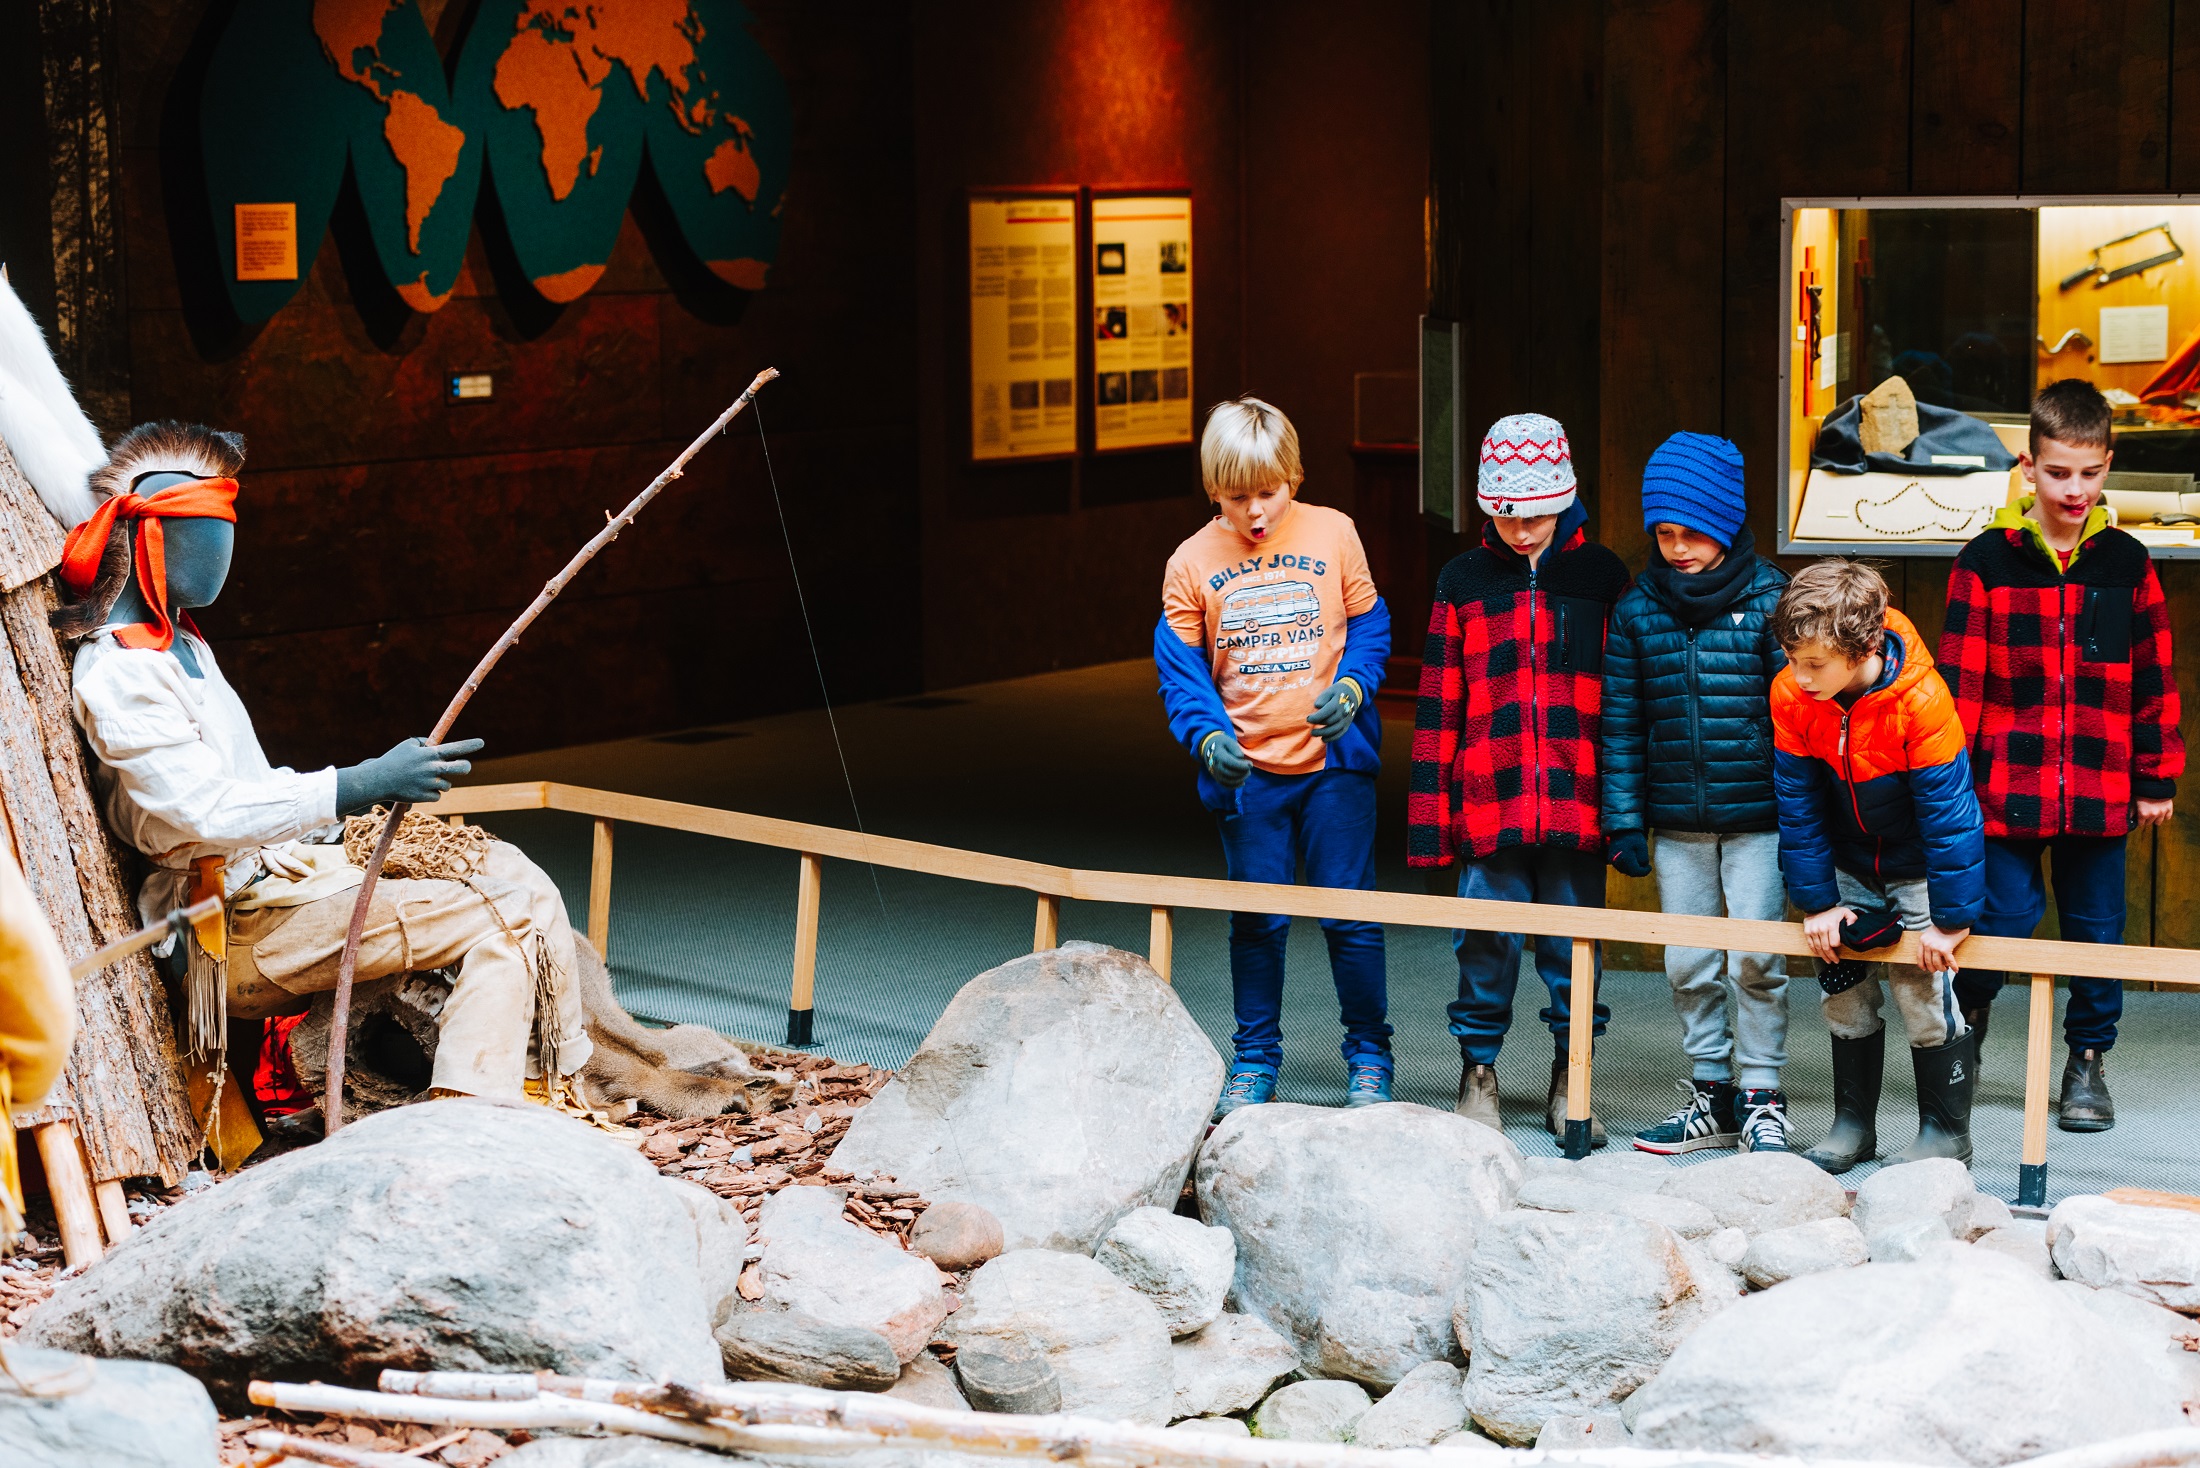 Five kids admiring a display in the museum